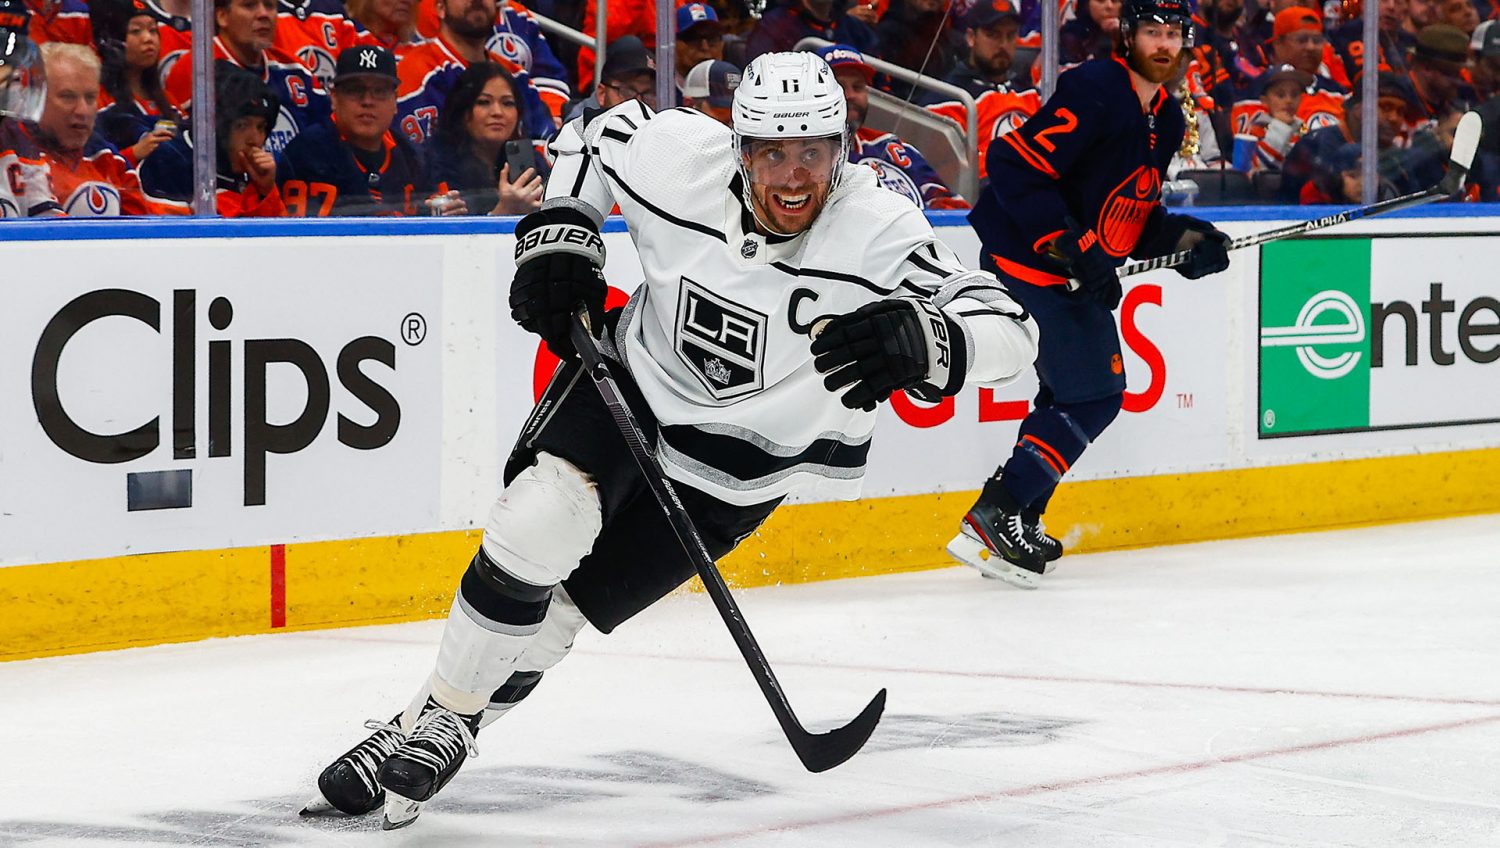 Stanley Cup: Los Angeles Kings move 2-0 up on New York Rangers thanks to Dustin  Brown, Ice Hockey News